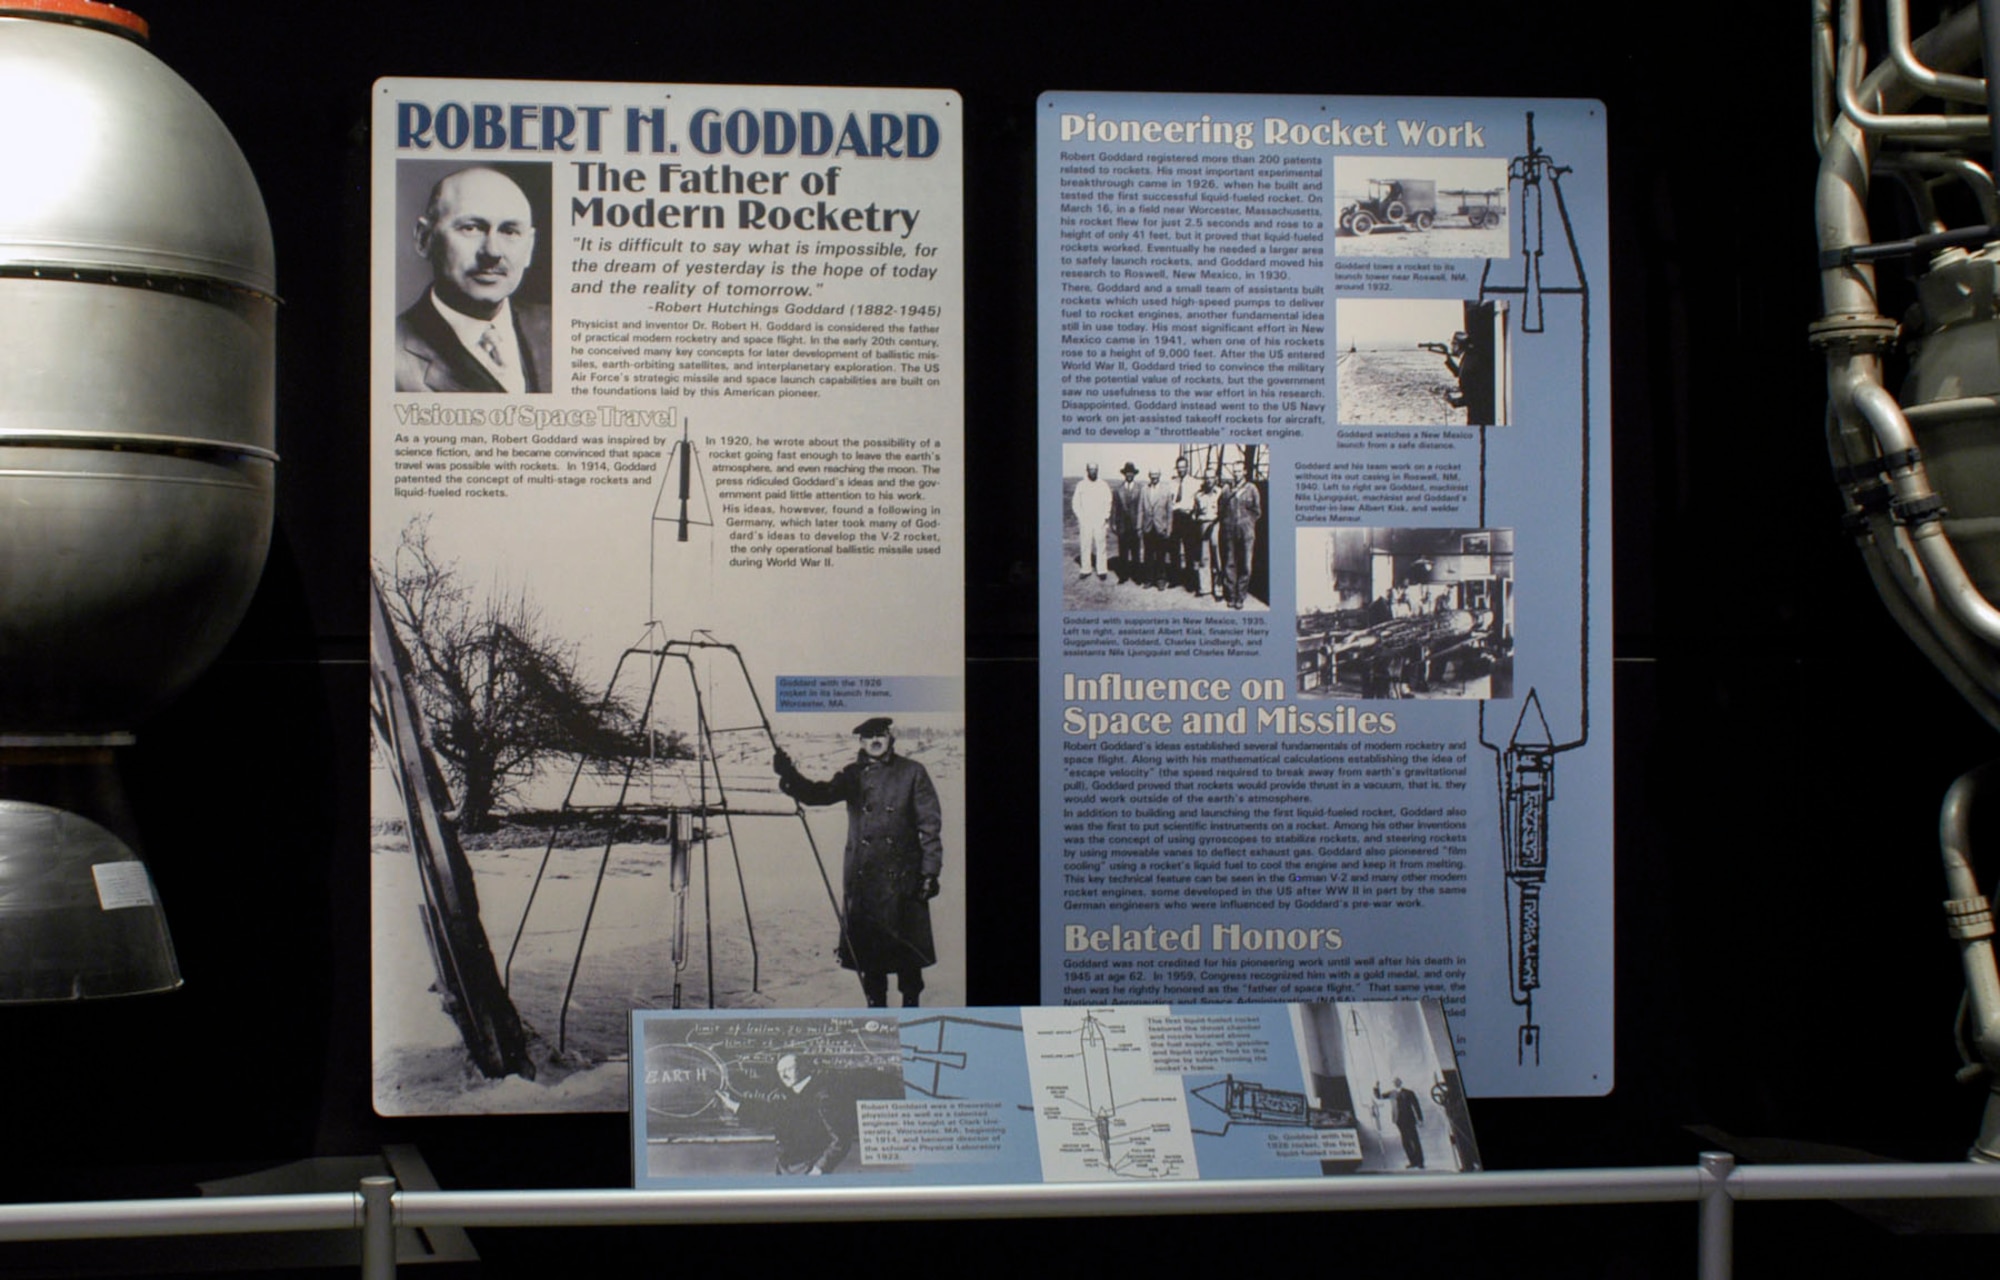 DAYTON, Ohio -- Dr. Robert H. Goddard exhibit in the Missile and Space Gallery at the National Museum of the United States Air Force. (U.S. Air Force photo)